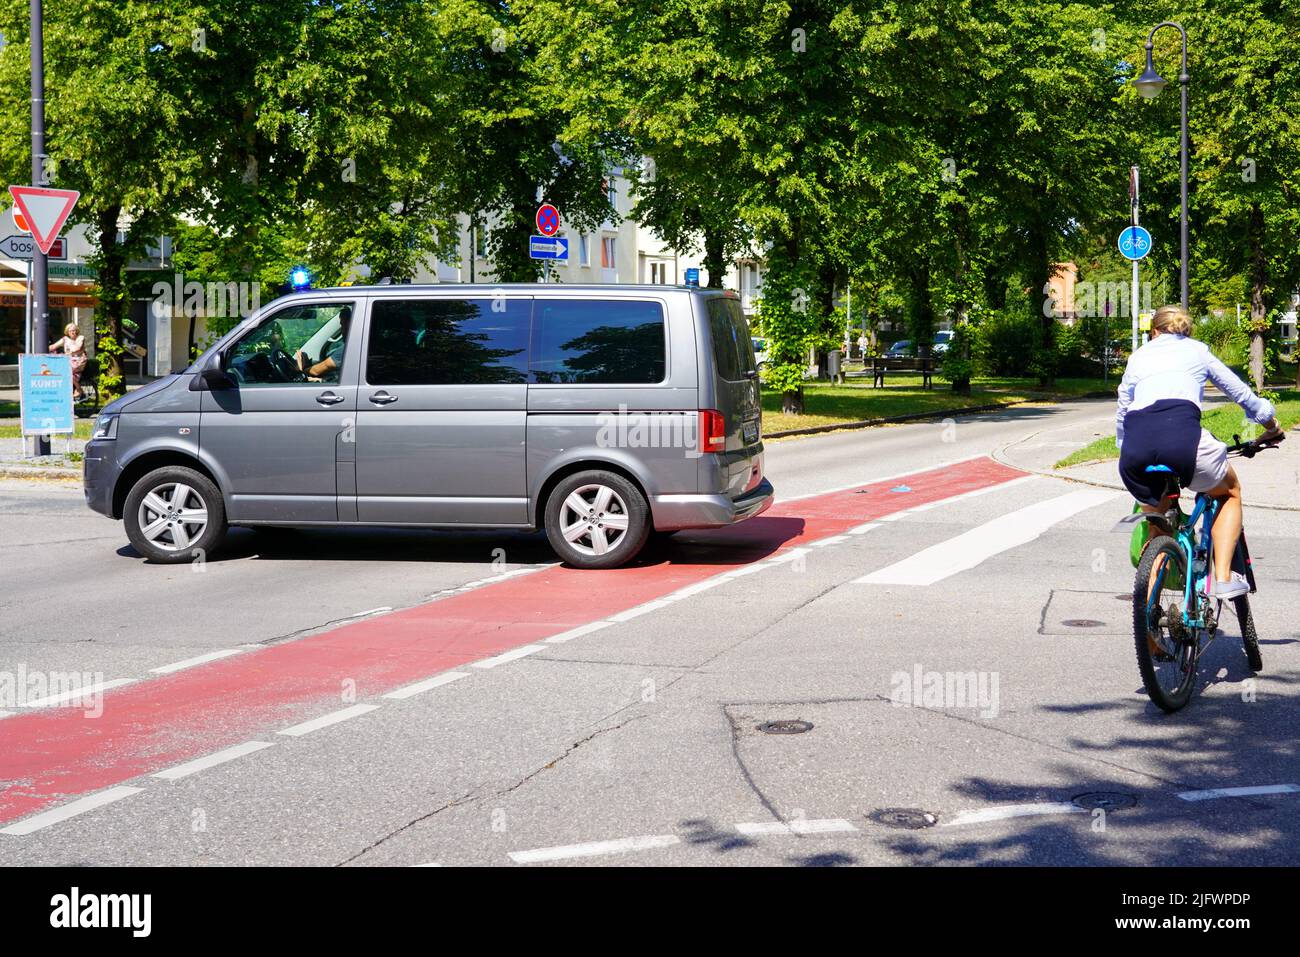 A German Criminal Police vehicle on a mission trip crosses a road intersection. Stock Photo